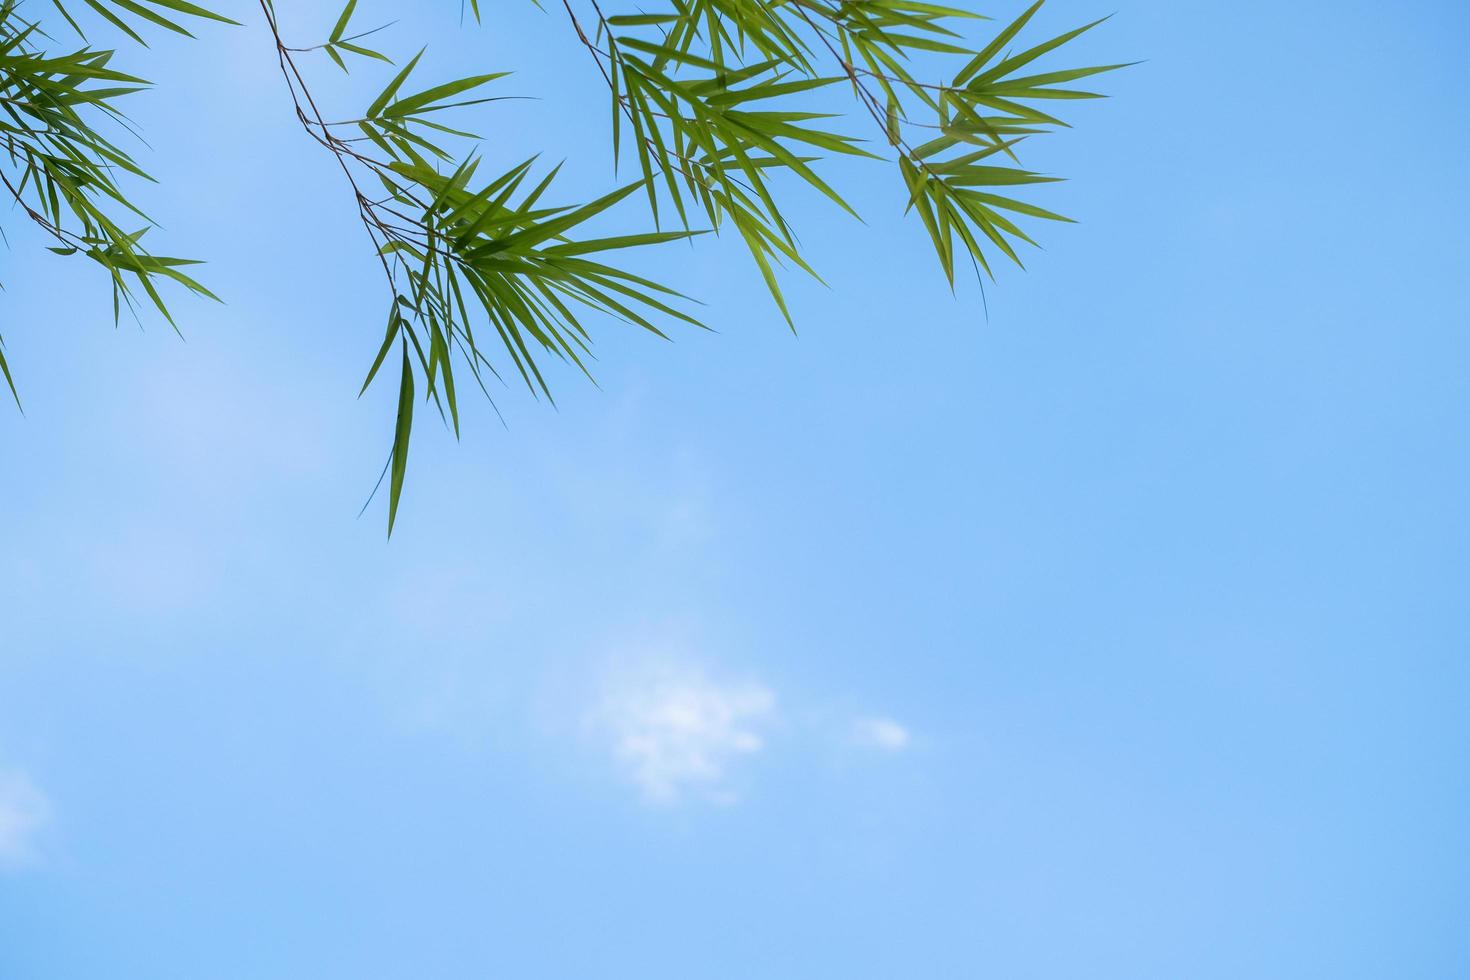 Bamboo leaves summer background with a blue sky photo